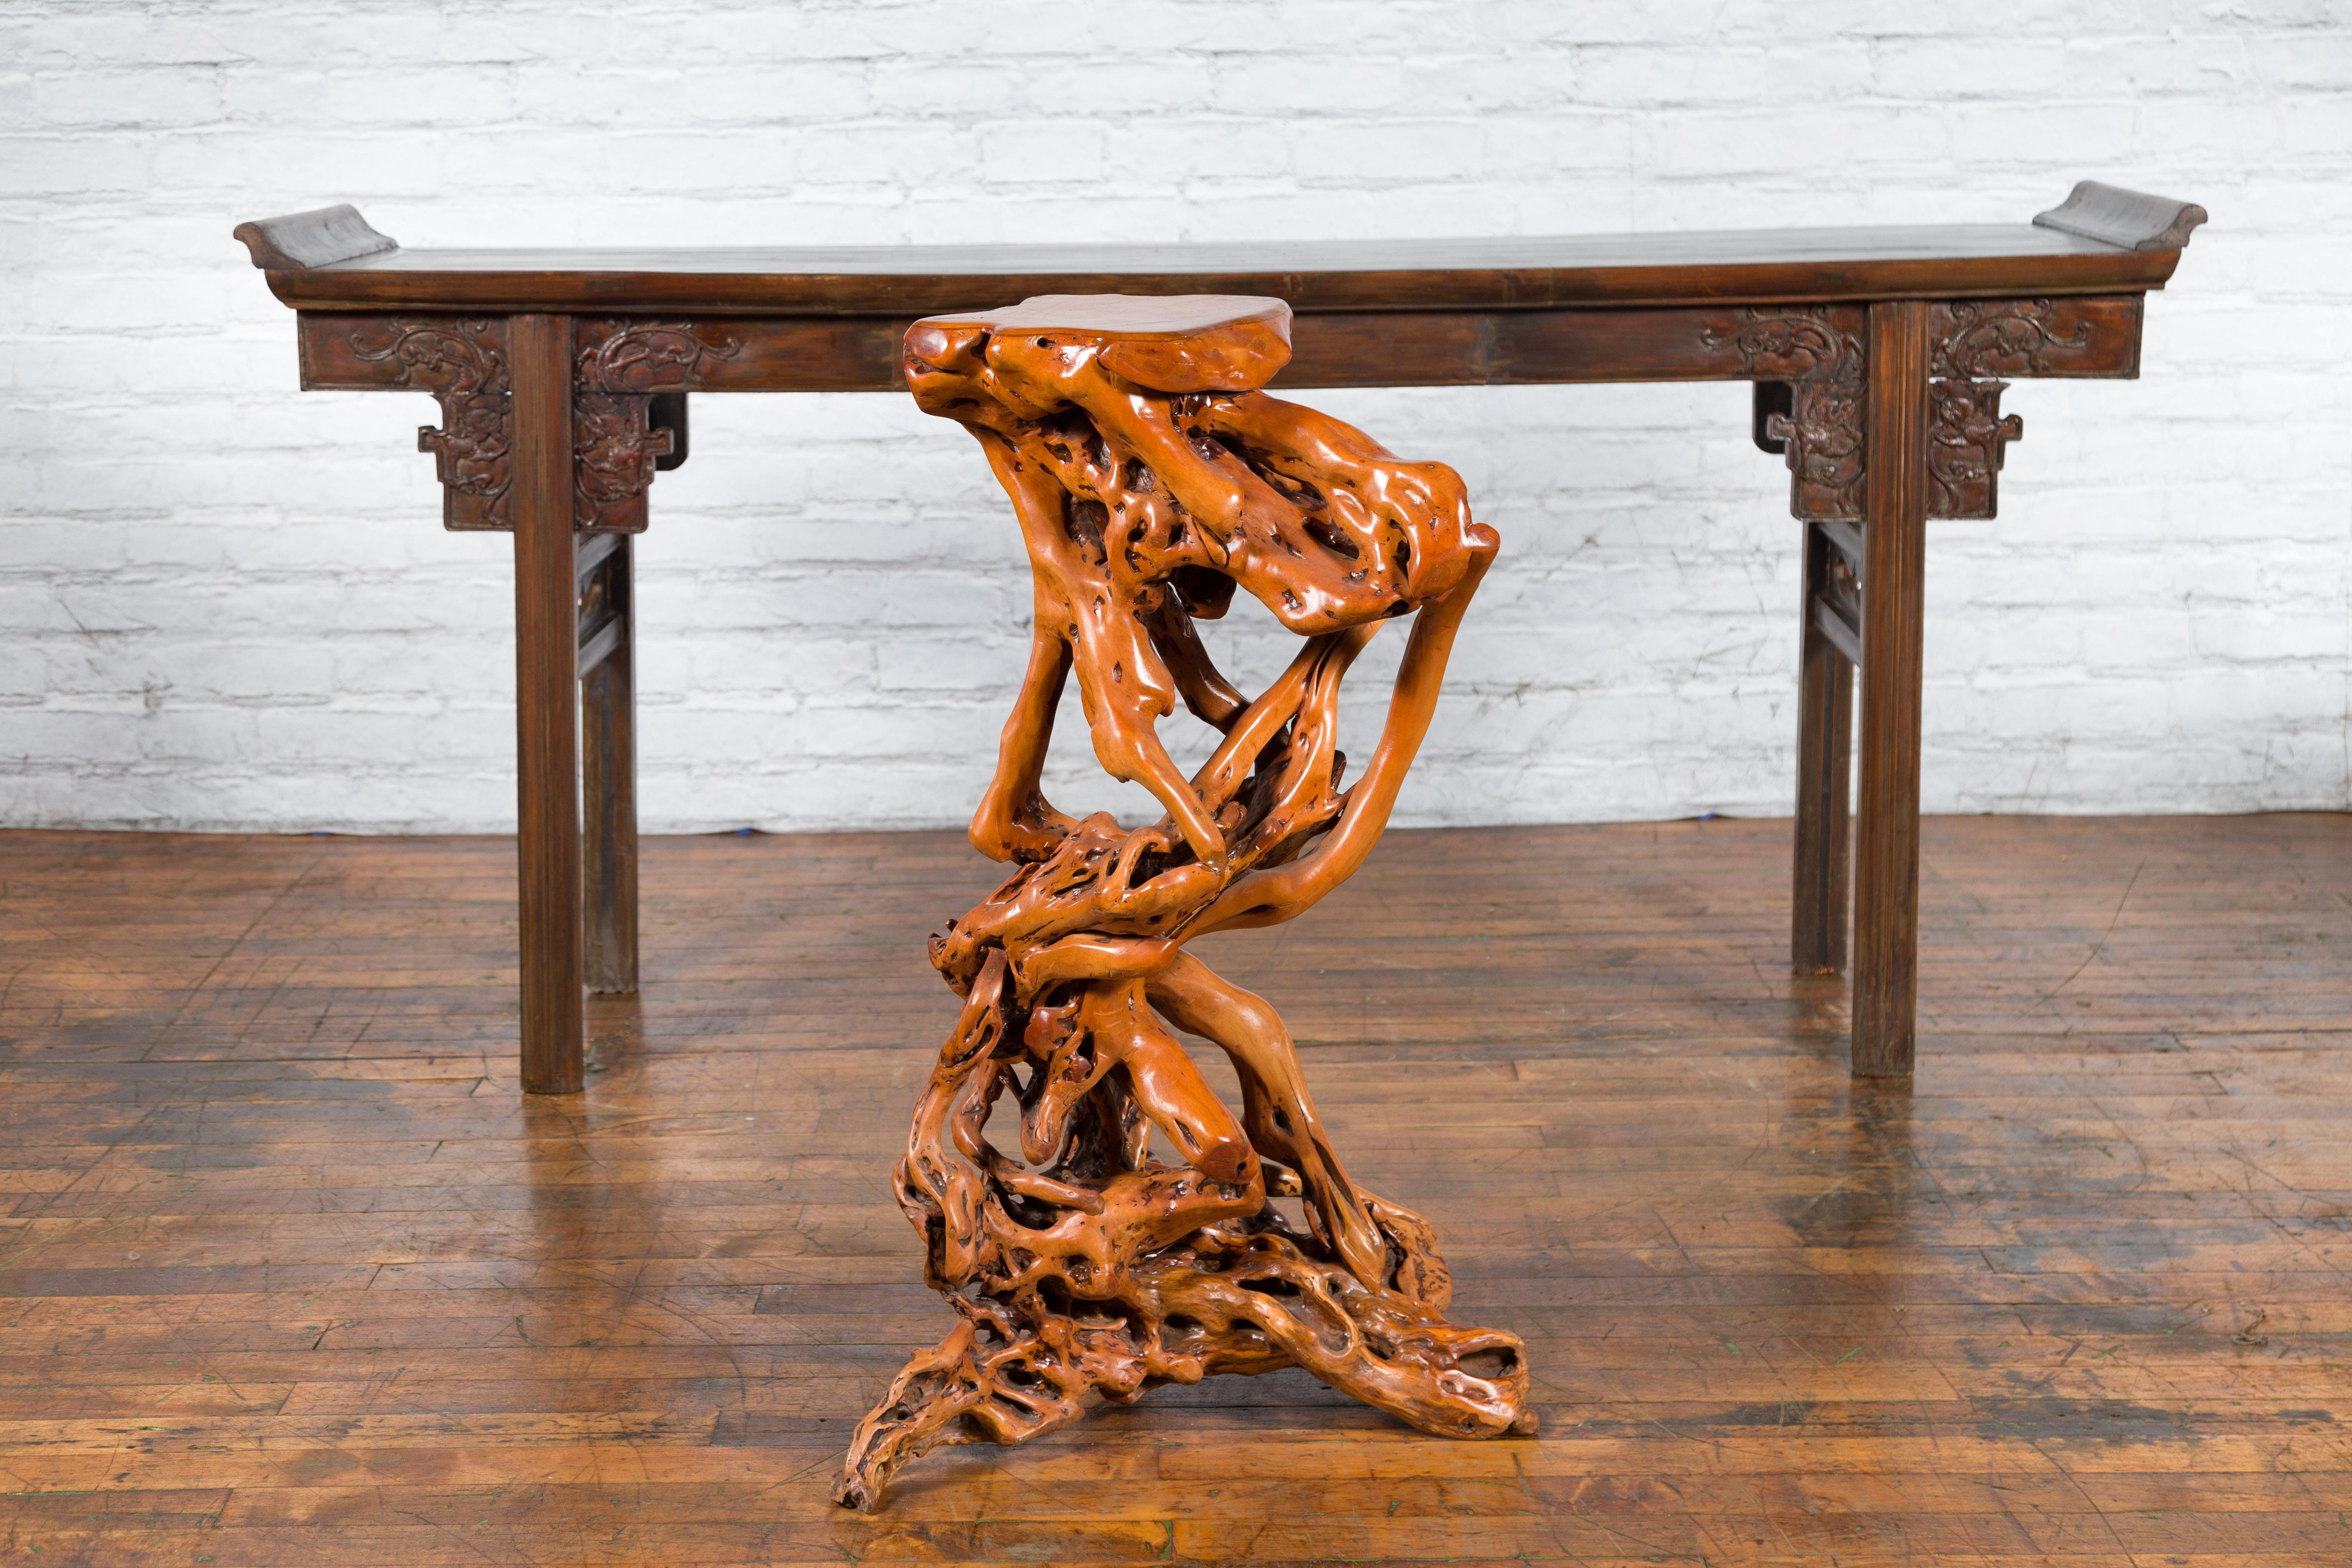 A vintage Chinese sculptural pedestal from the mid 20th century, made from a tree root with lacquered finish. Created in China during the Midcentury period, this pedestal attracts our immediate attention with its intricate lines and warm color. Made